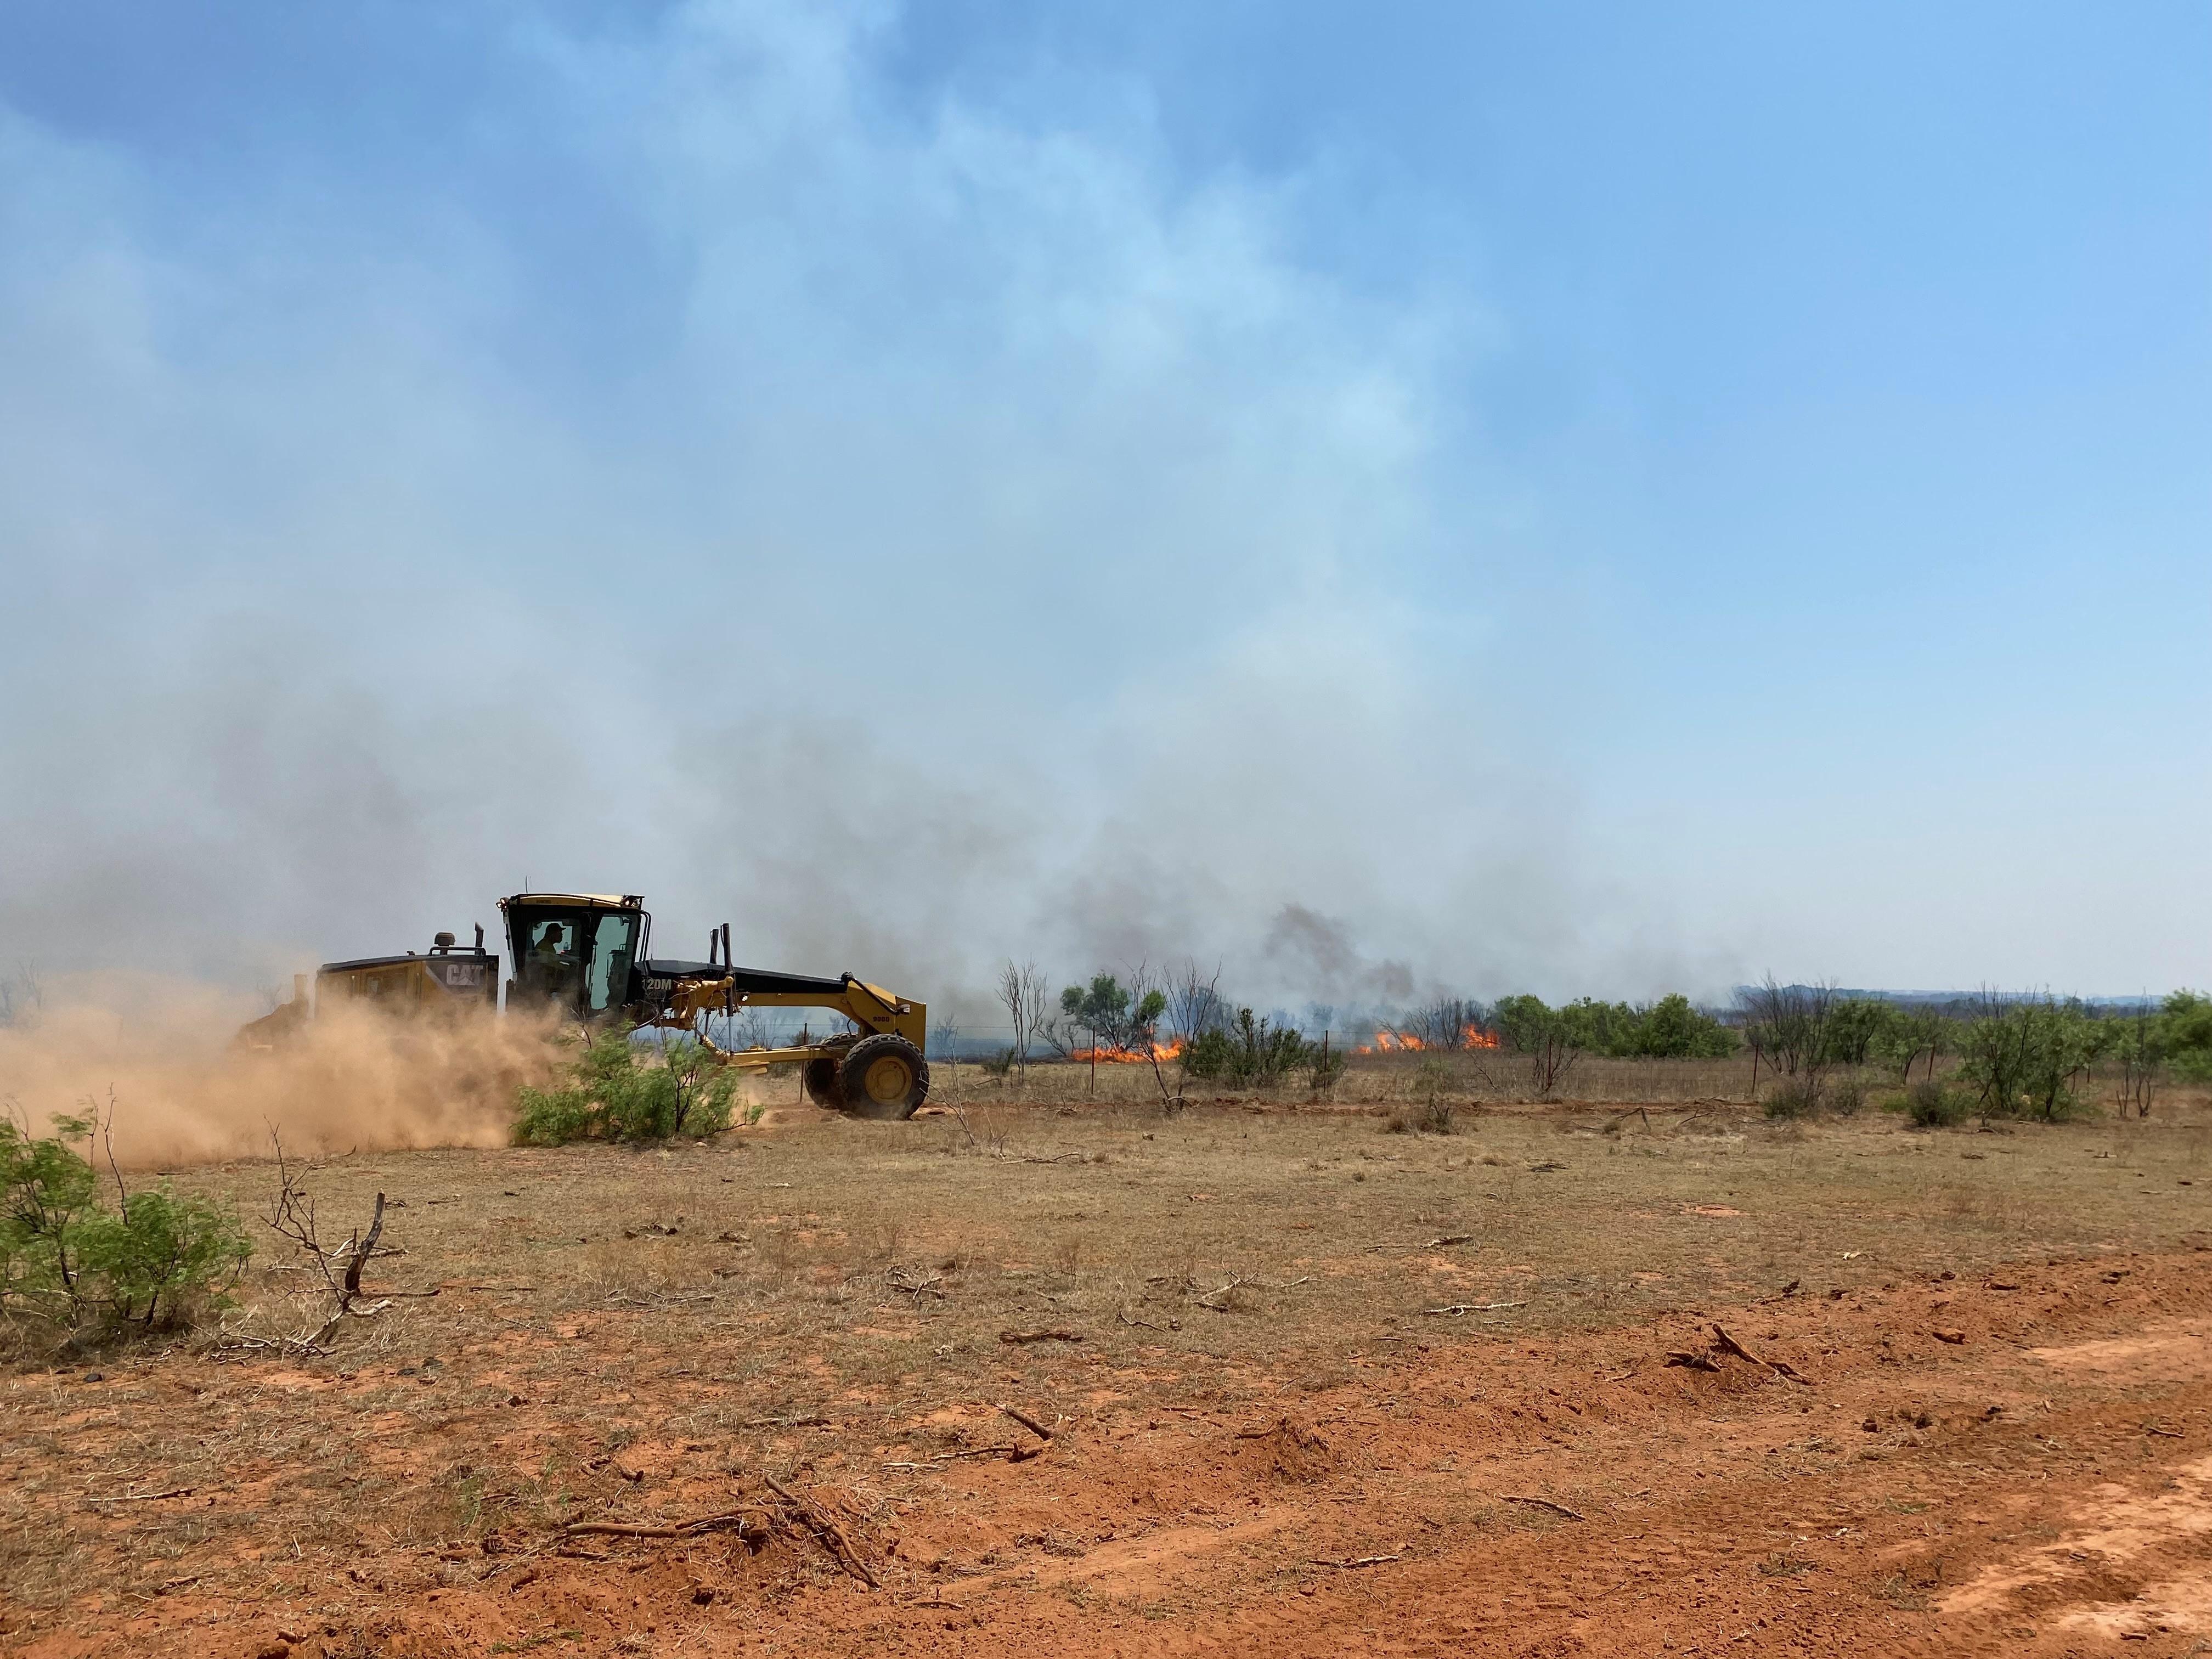 in this picture you can see a motor grader moving towards the right with its blade down widening an already stablished dozer line. in the background you can see smoke and fire coming towards the dozer line.